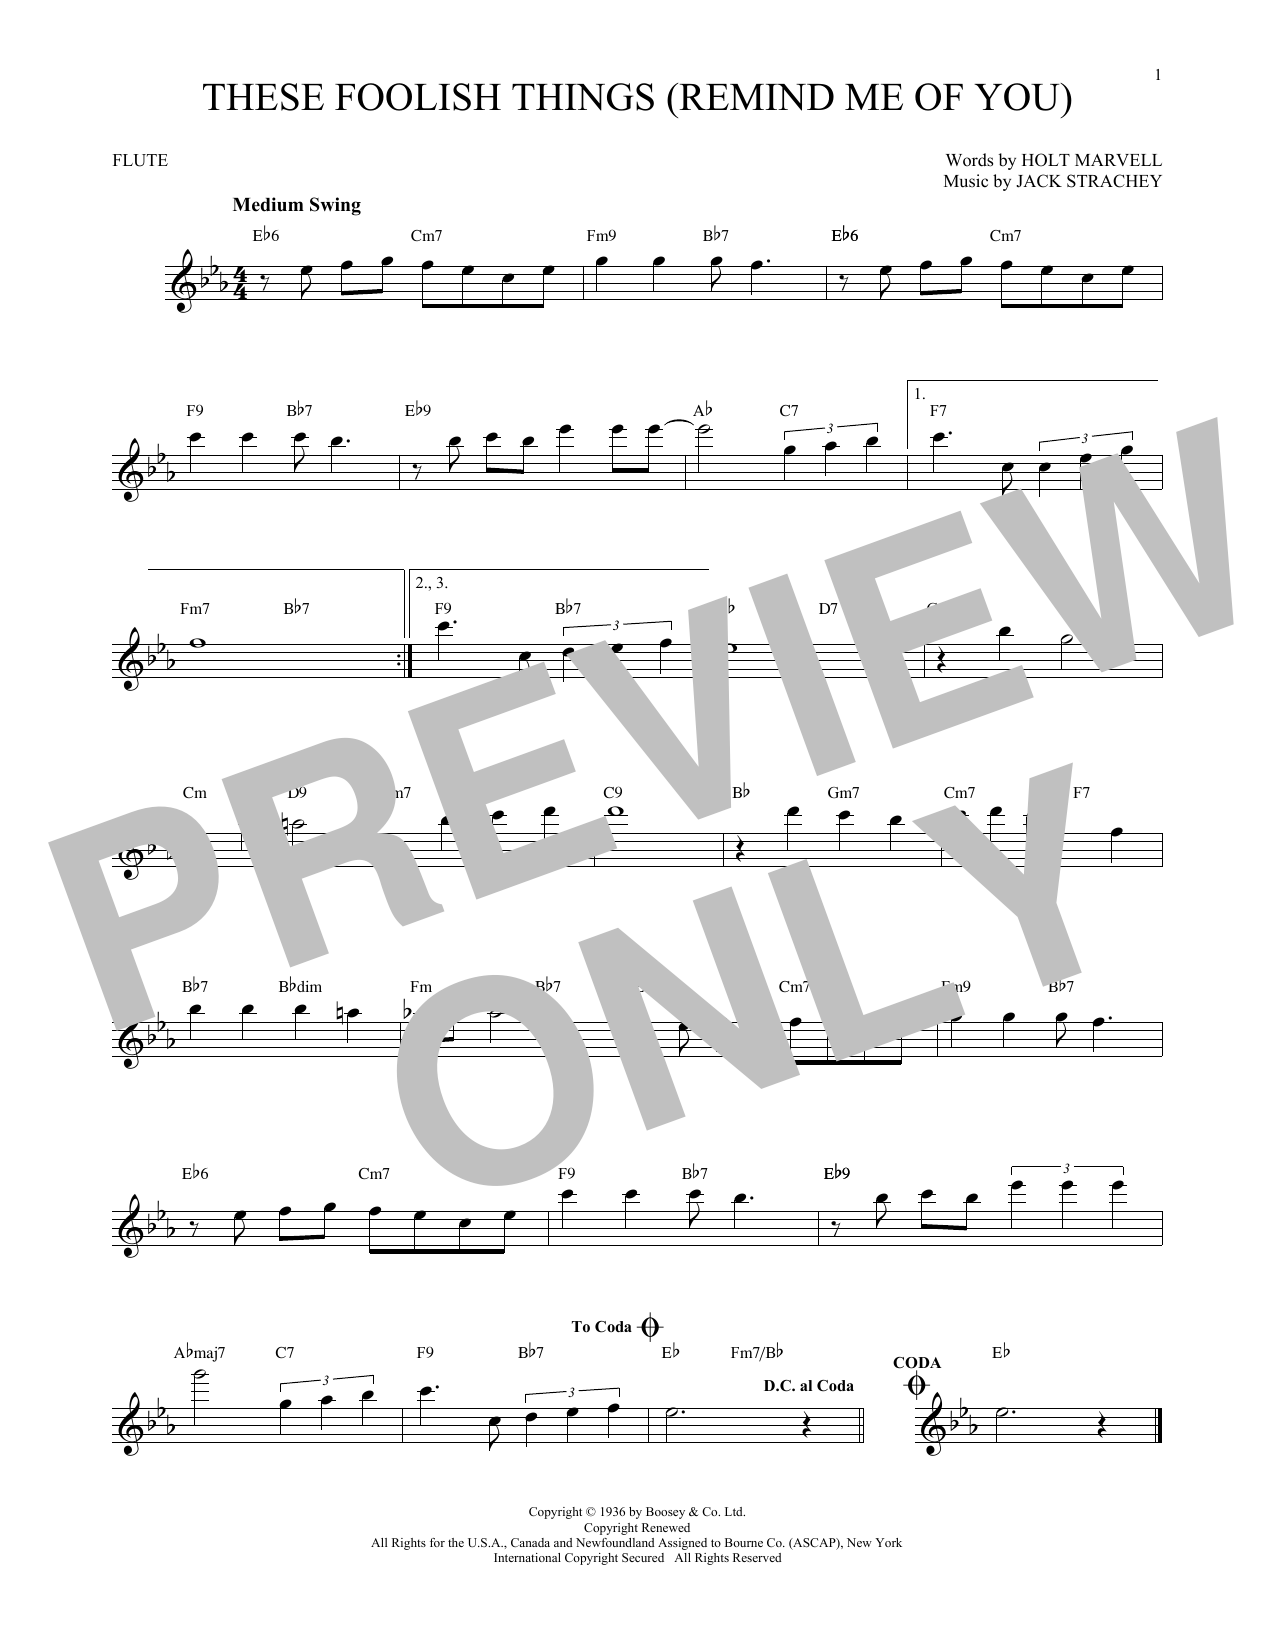 Download Holt Marvell These Foolish Things (Remind Me Of You) Sheet Music